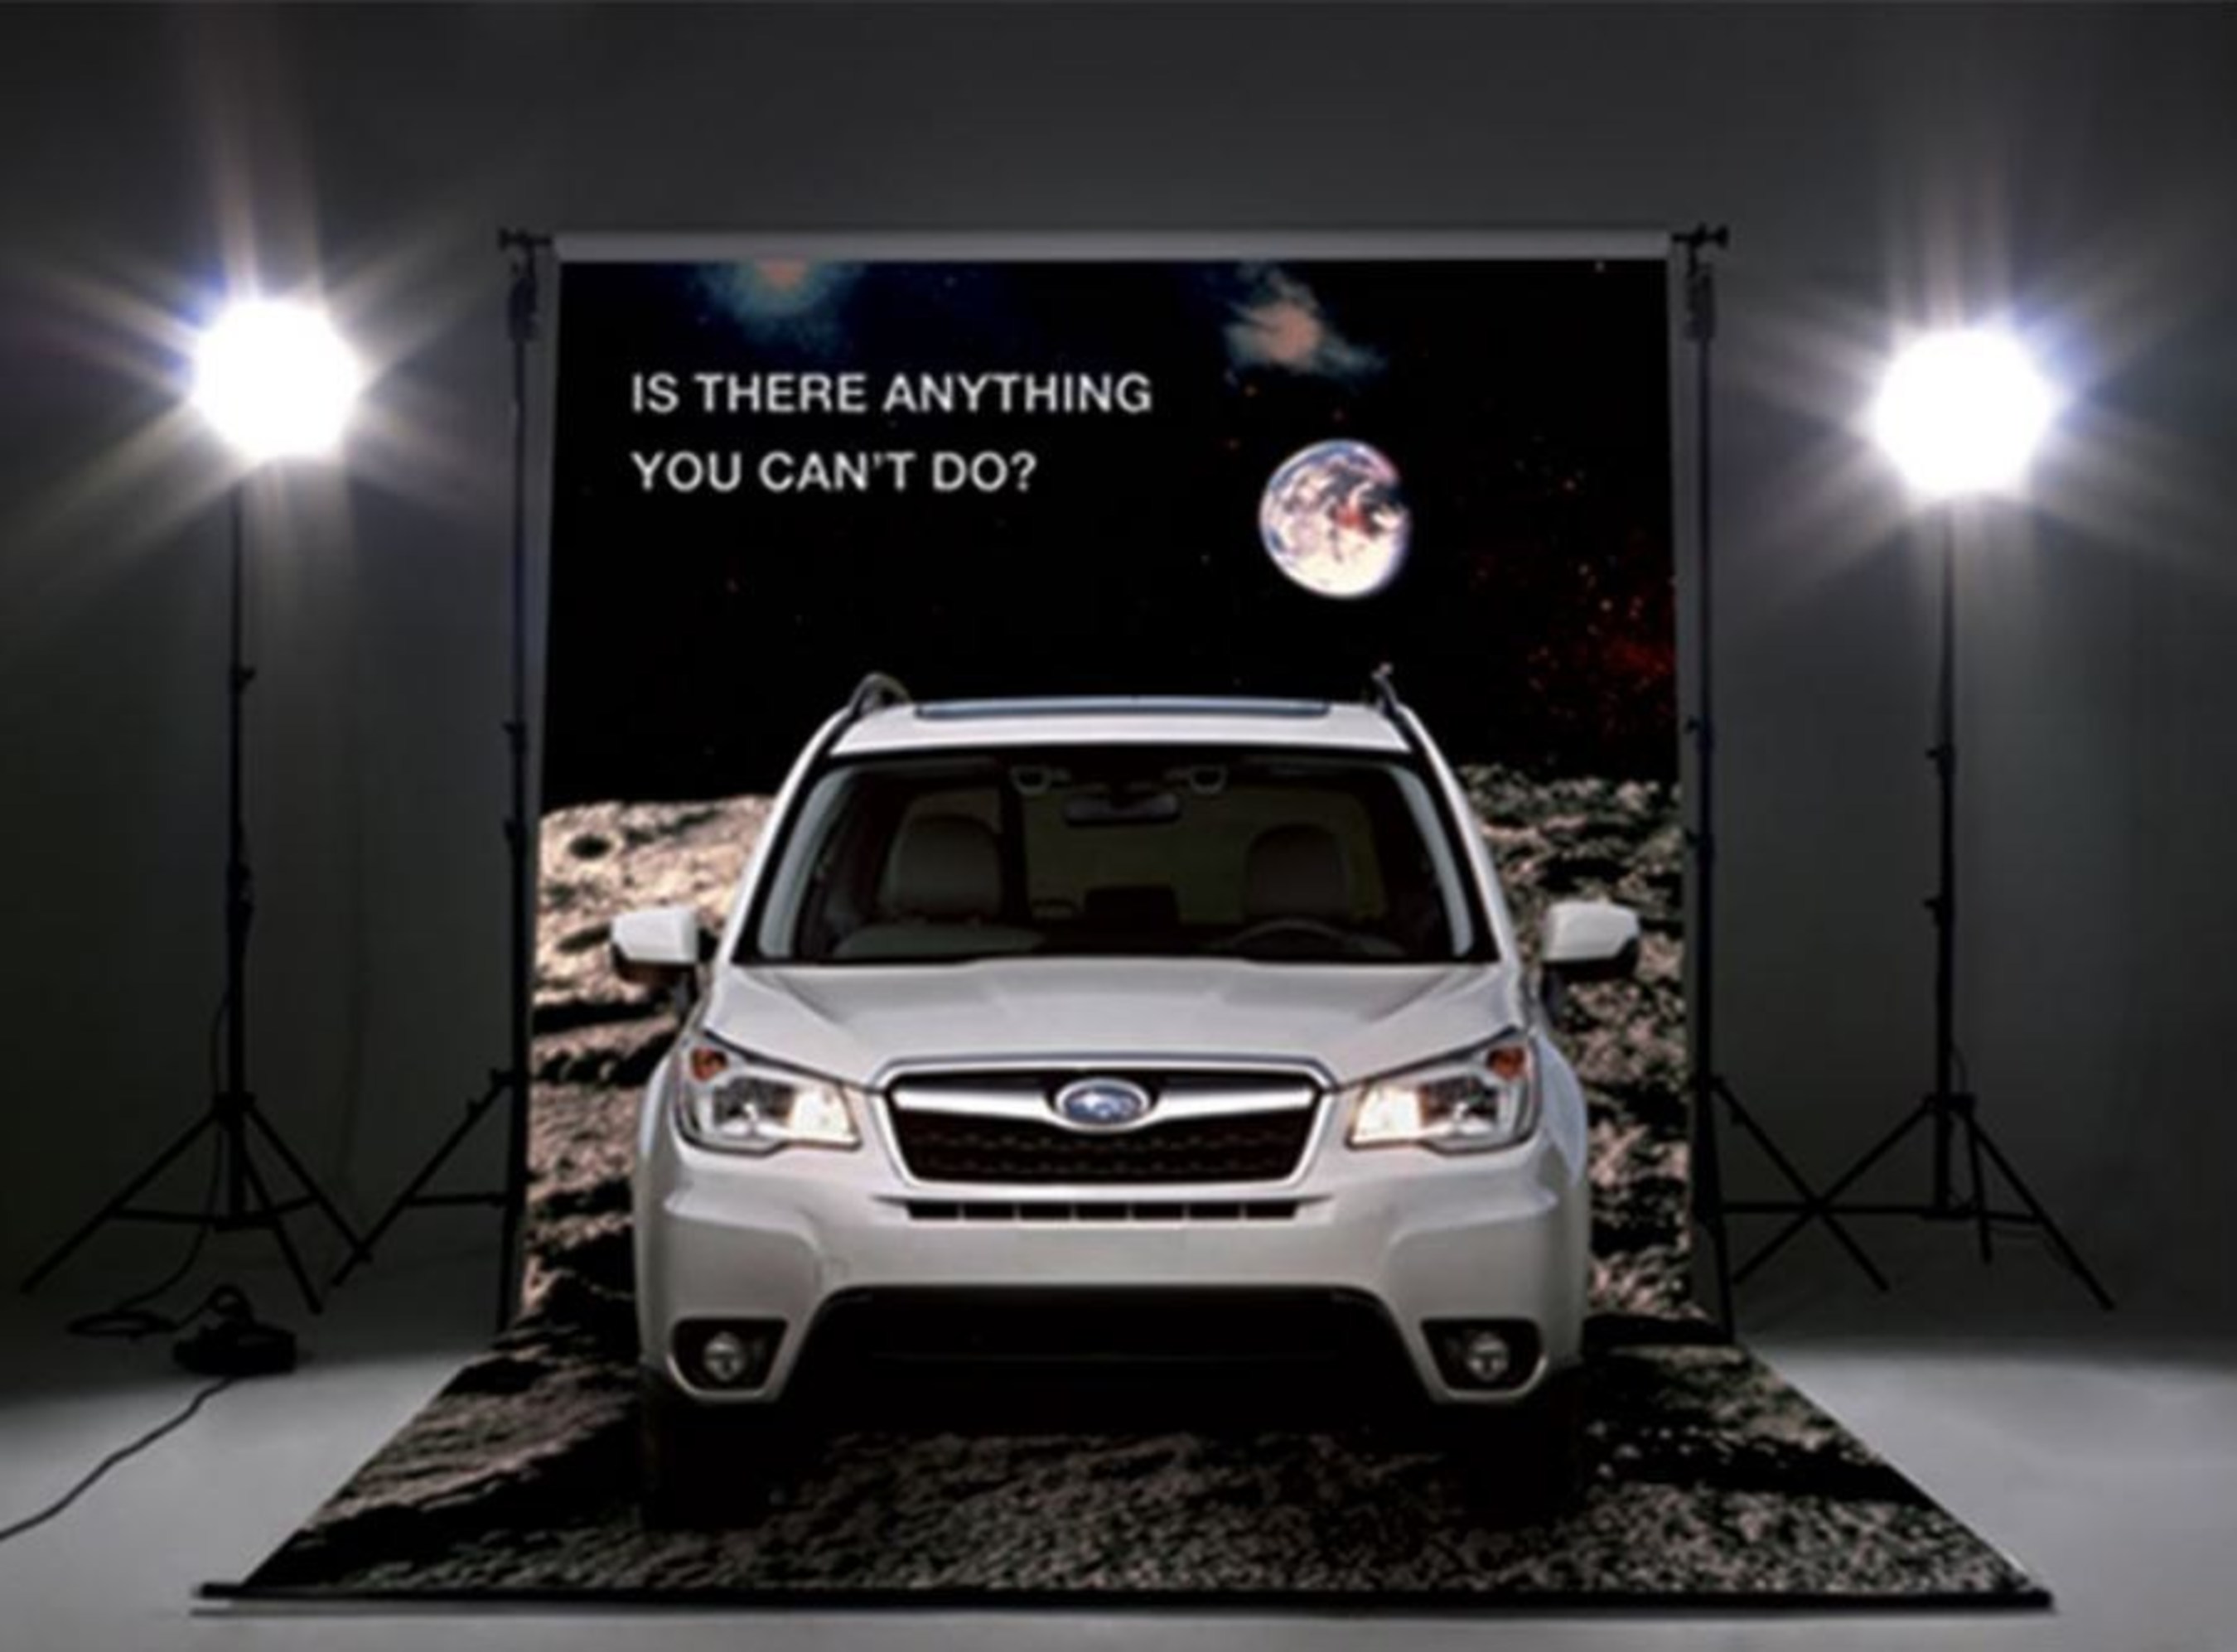 Mock-up of Subaru SE Asia Forester "Is There Anything You Can't Do?" green screen experience. Courtesy of Cibo